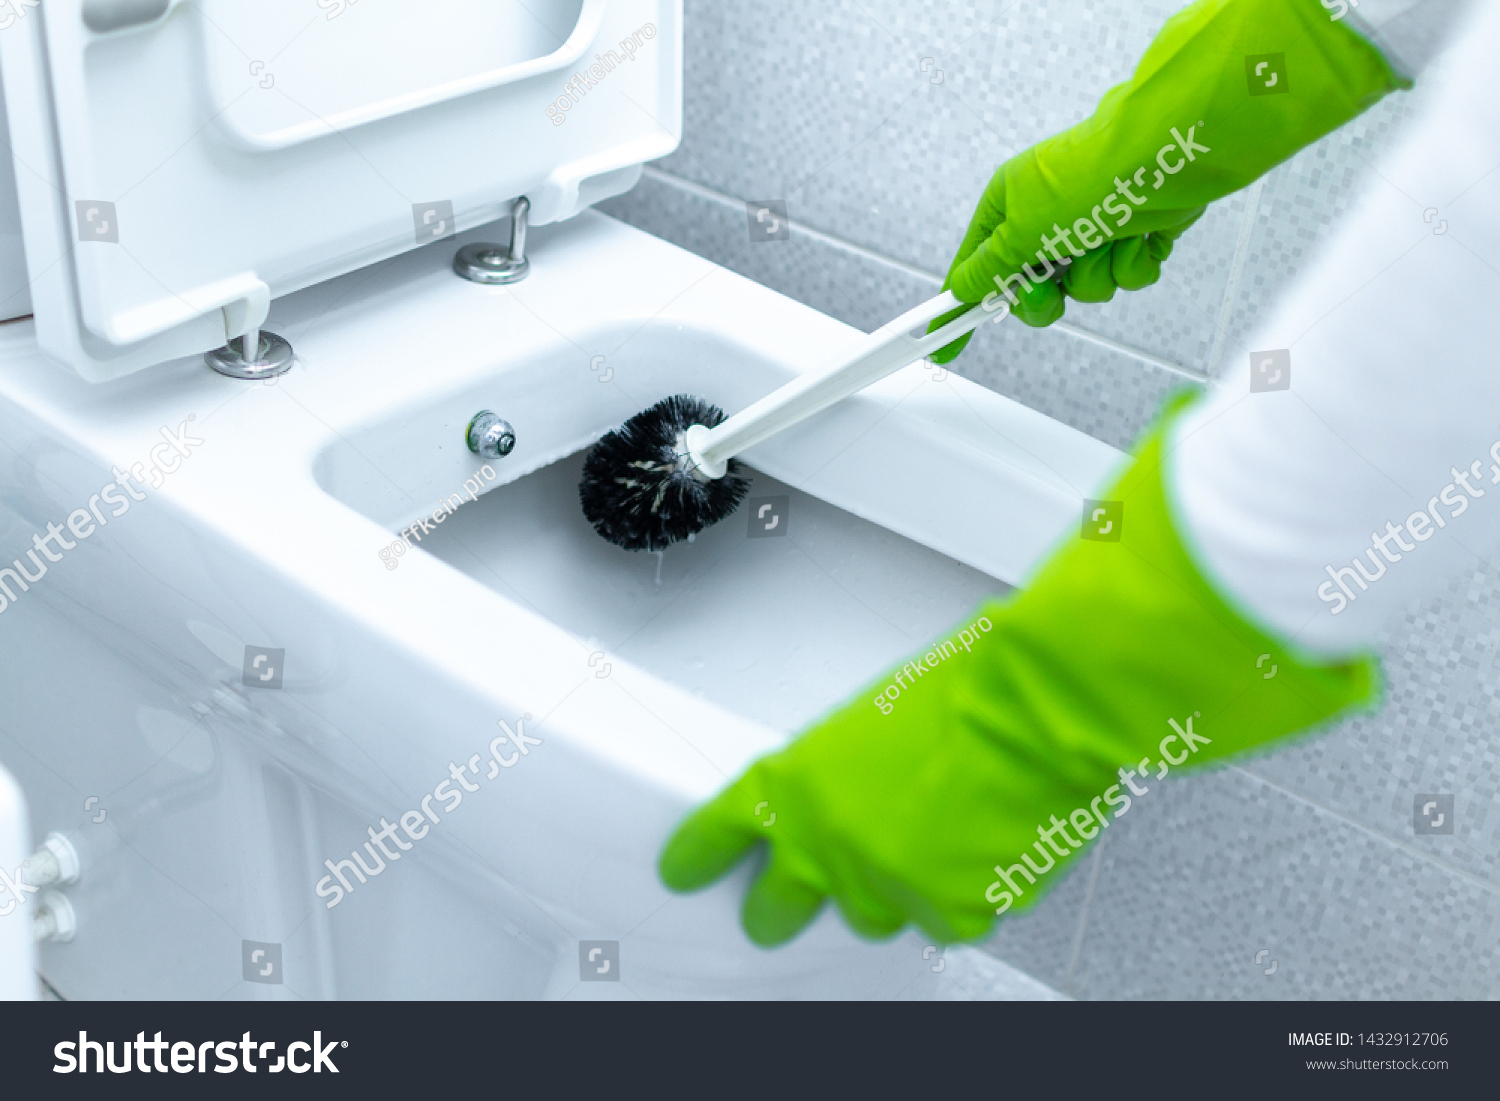 Washing and disinfecting toilet using cleaning scrub brush. Cleaning service and household chores #1432912706